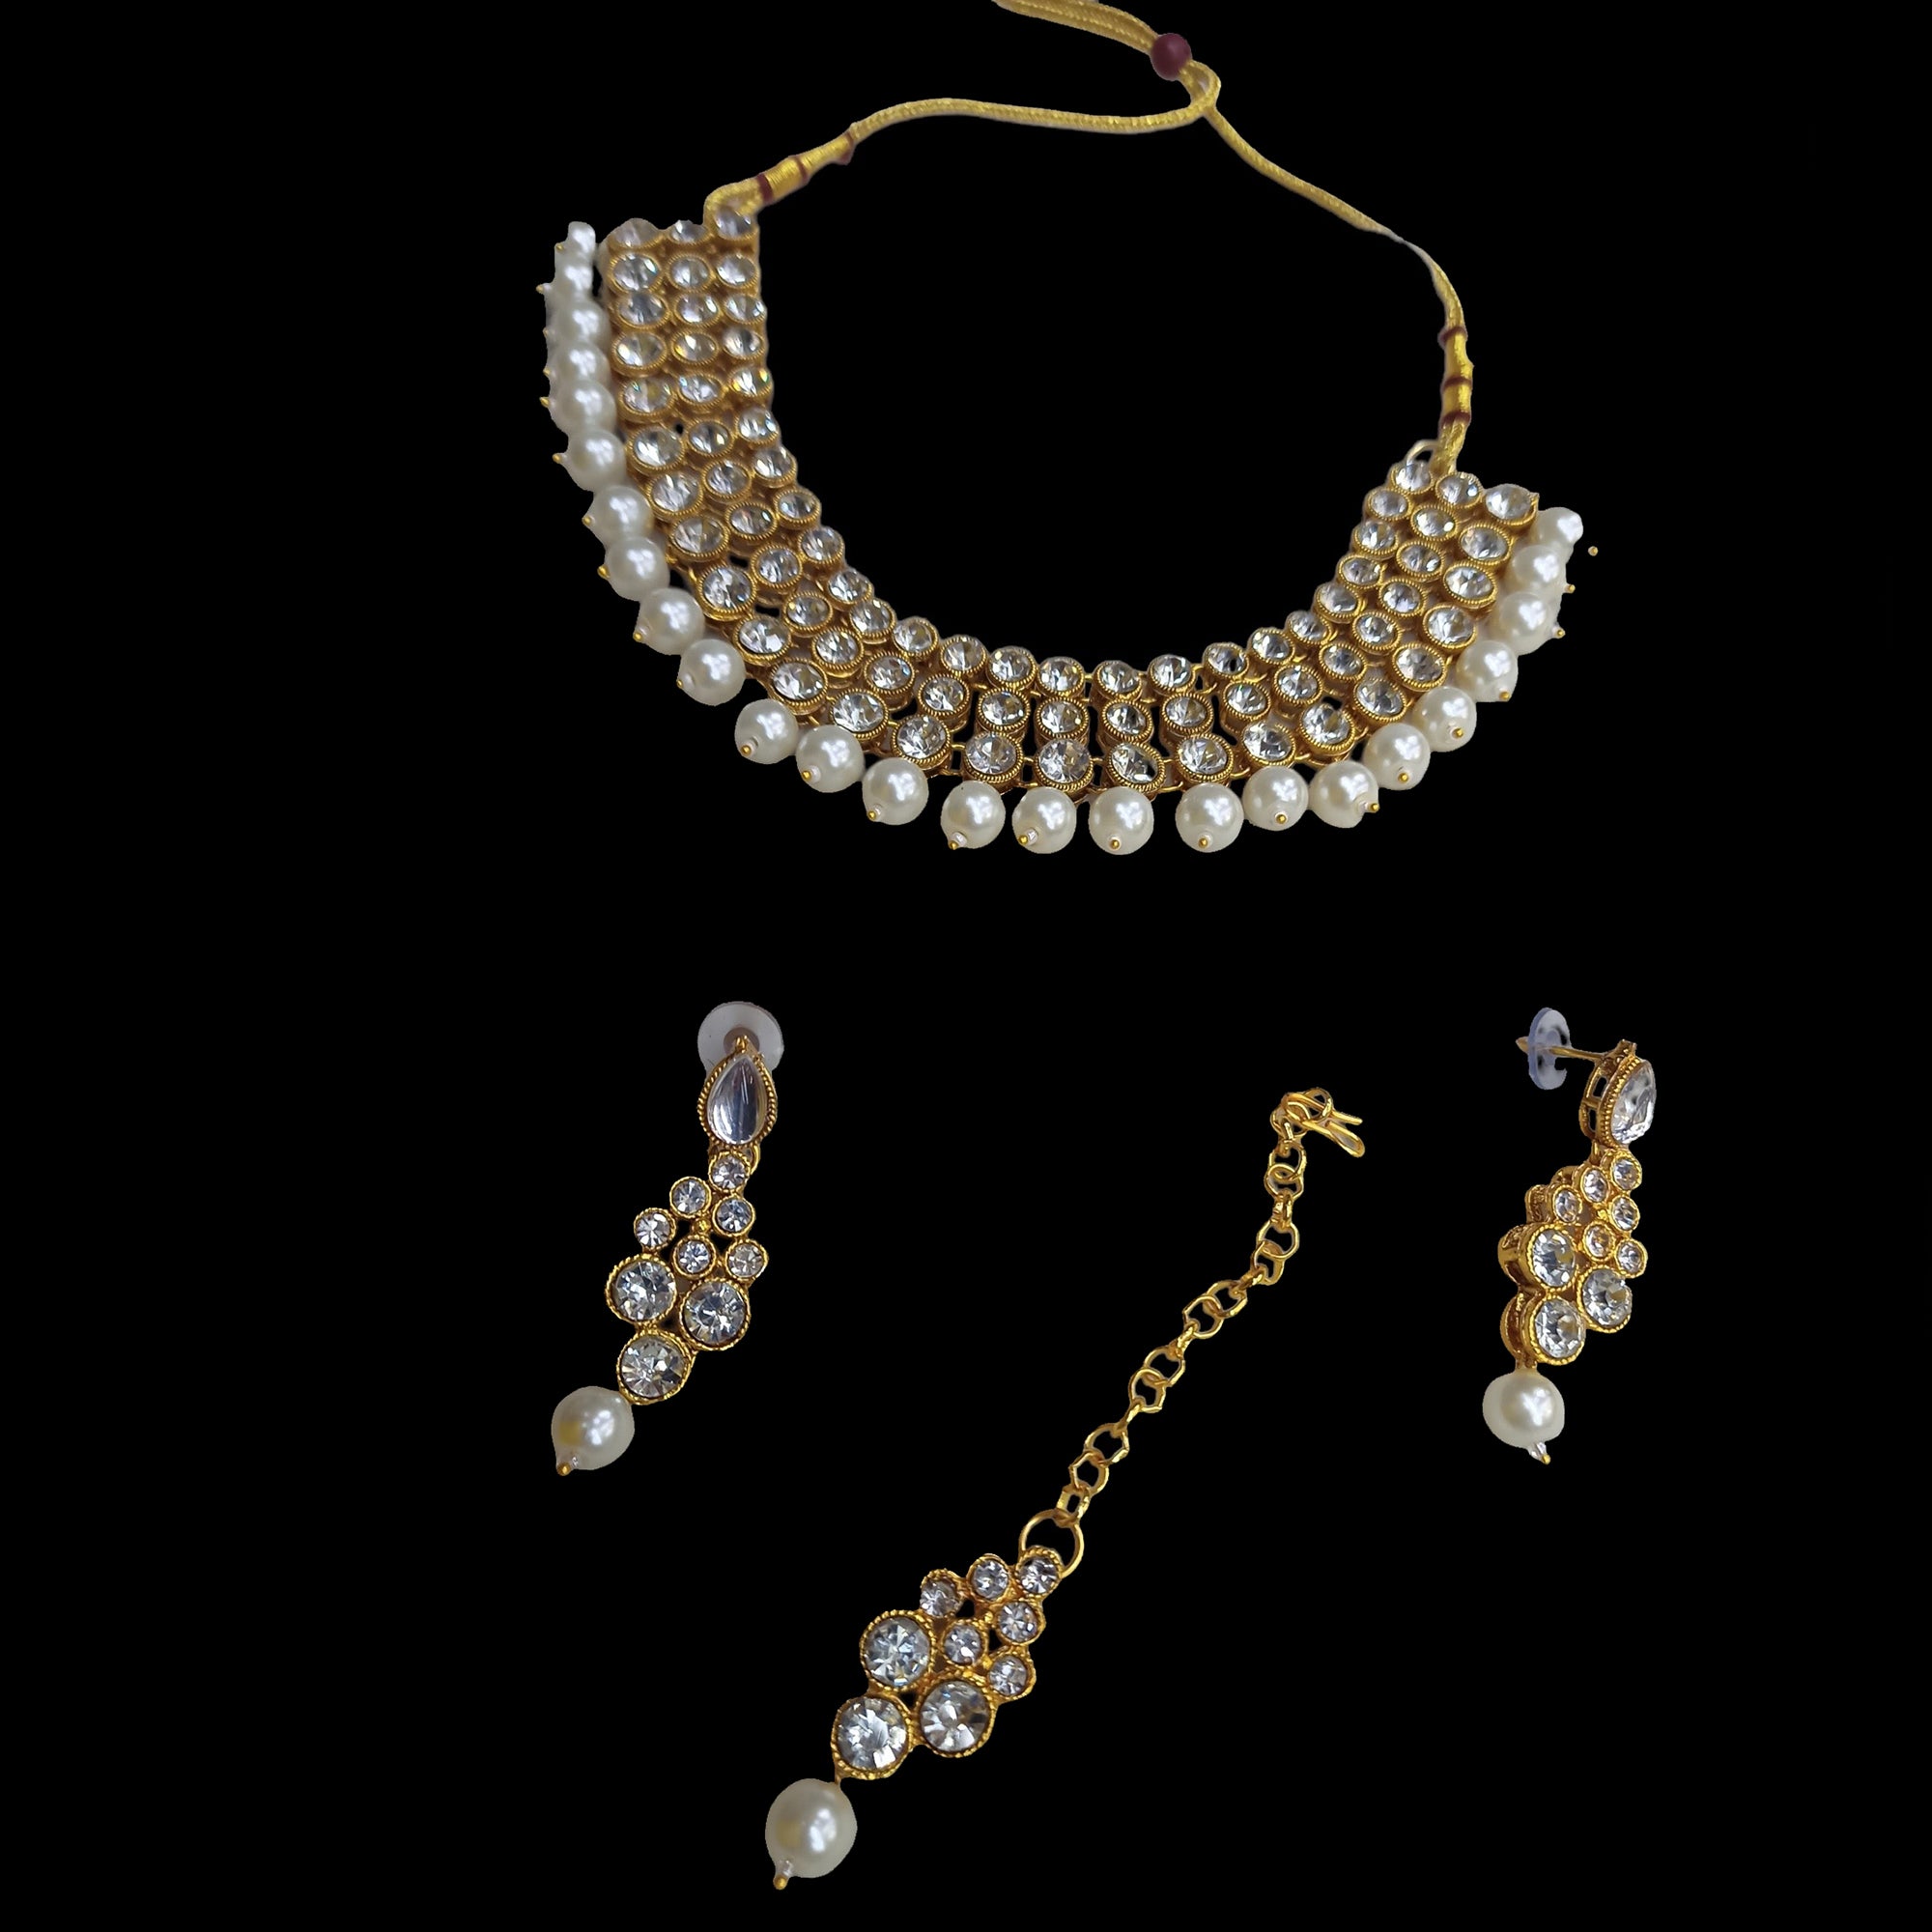 PC Necklace Sets-3 Styles - Vintage India NYC